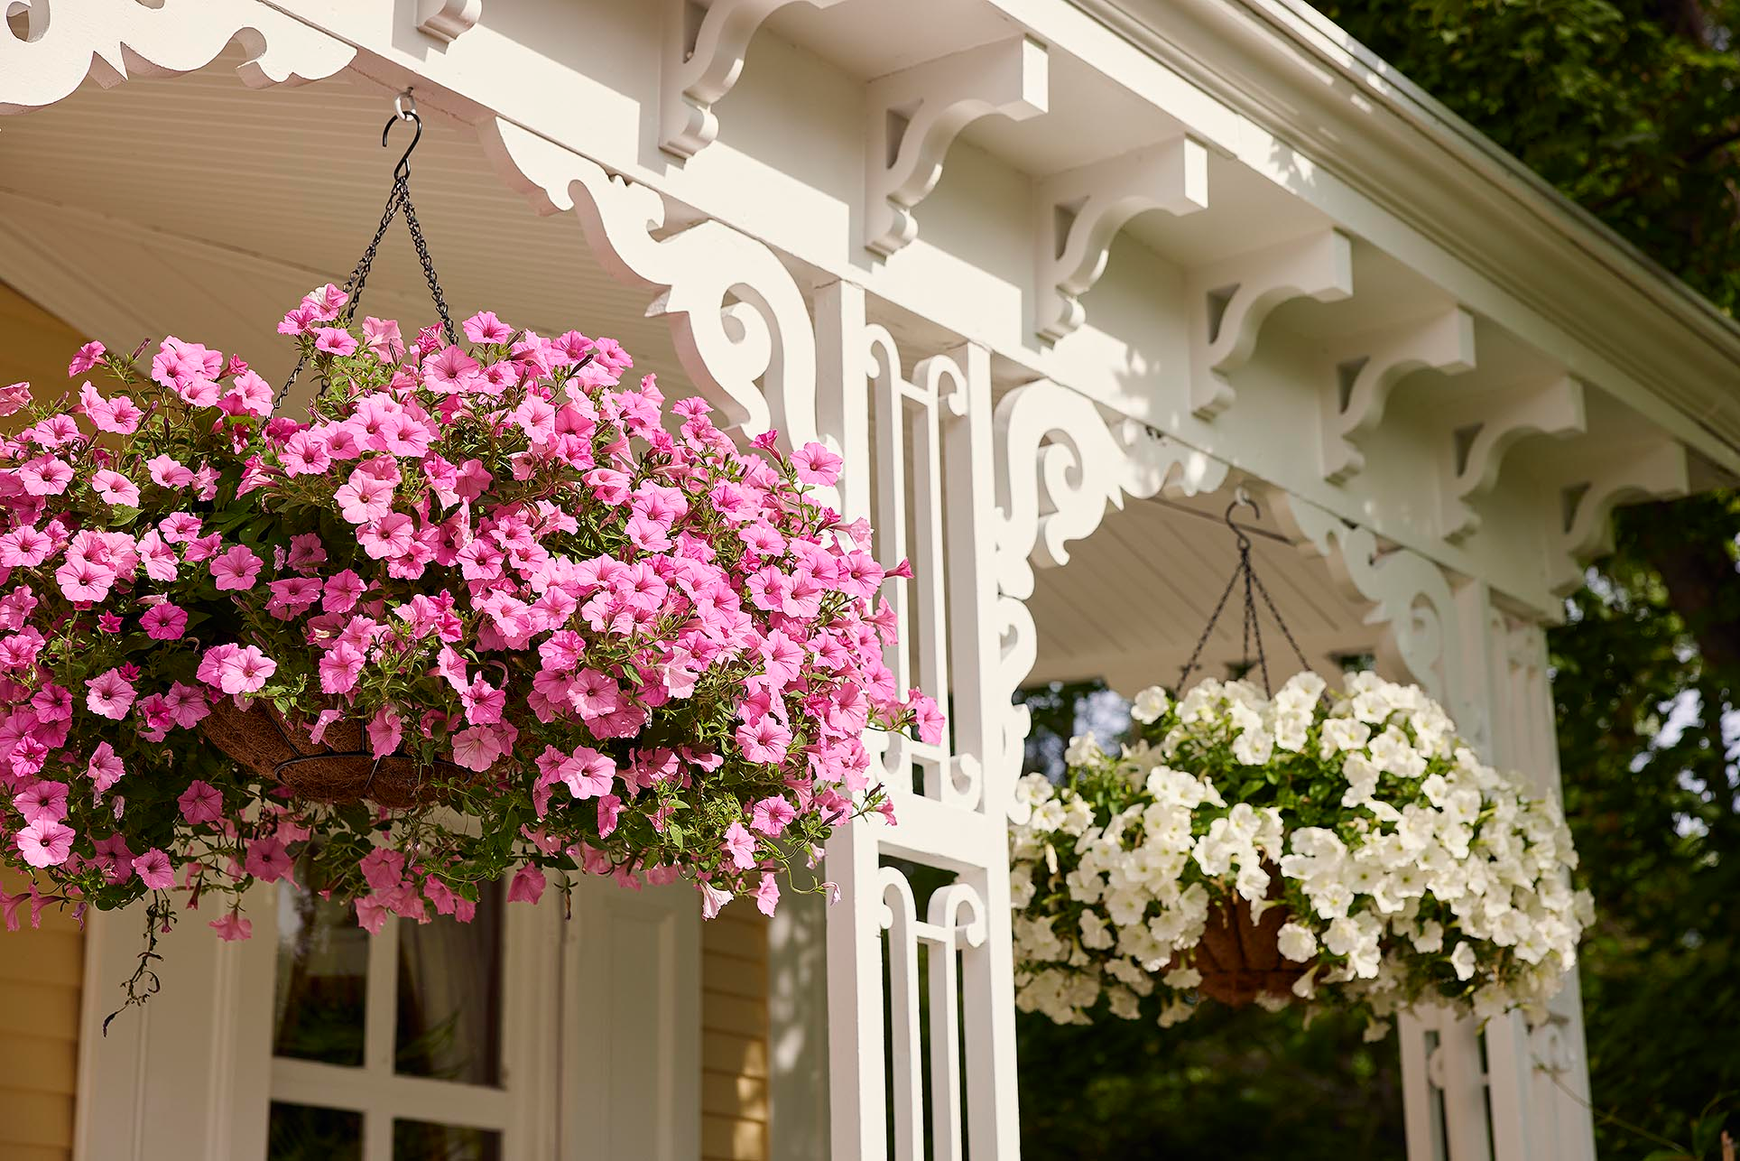 Hanging baskets overflowing with pink and white petunias